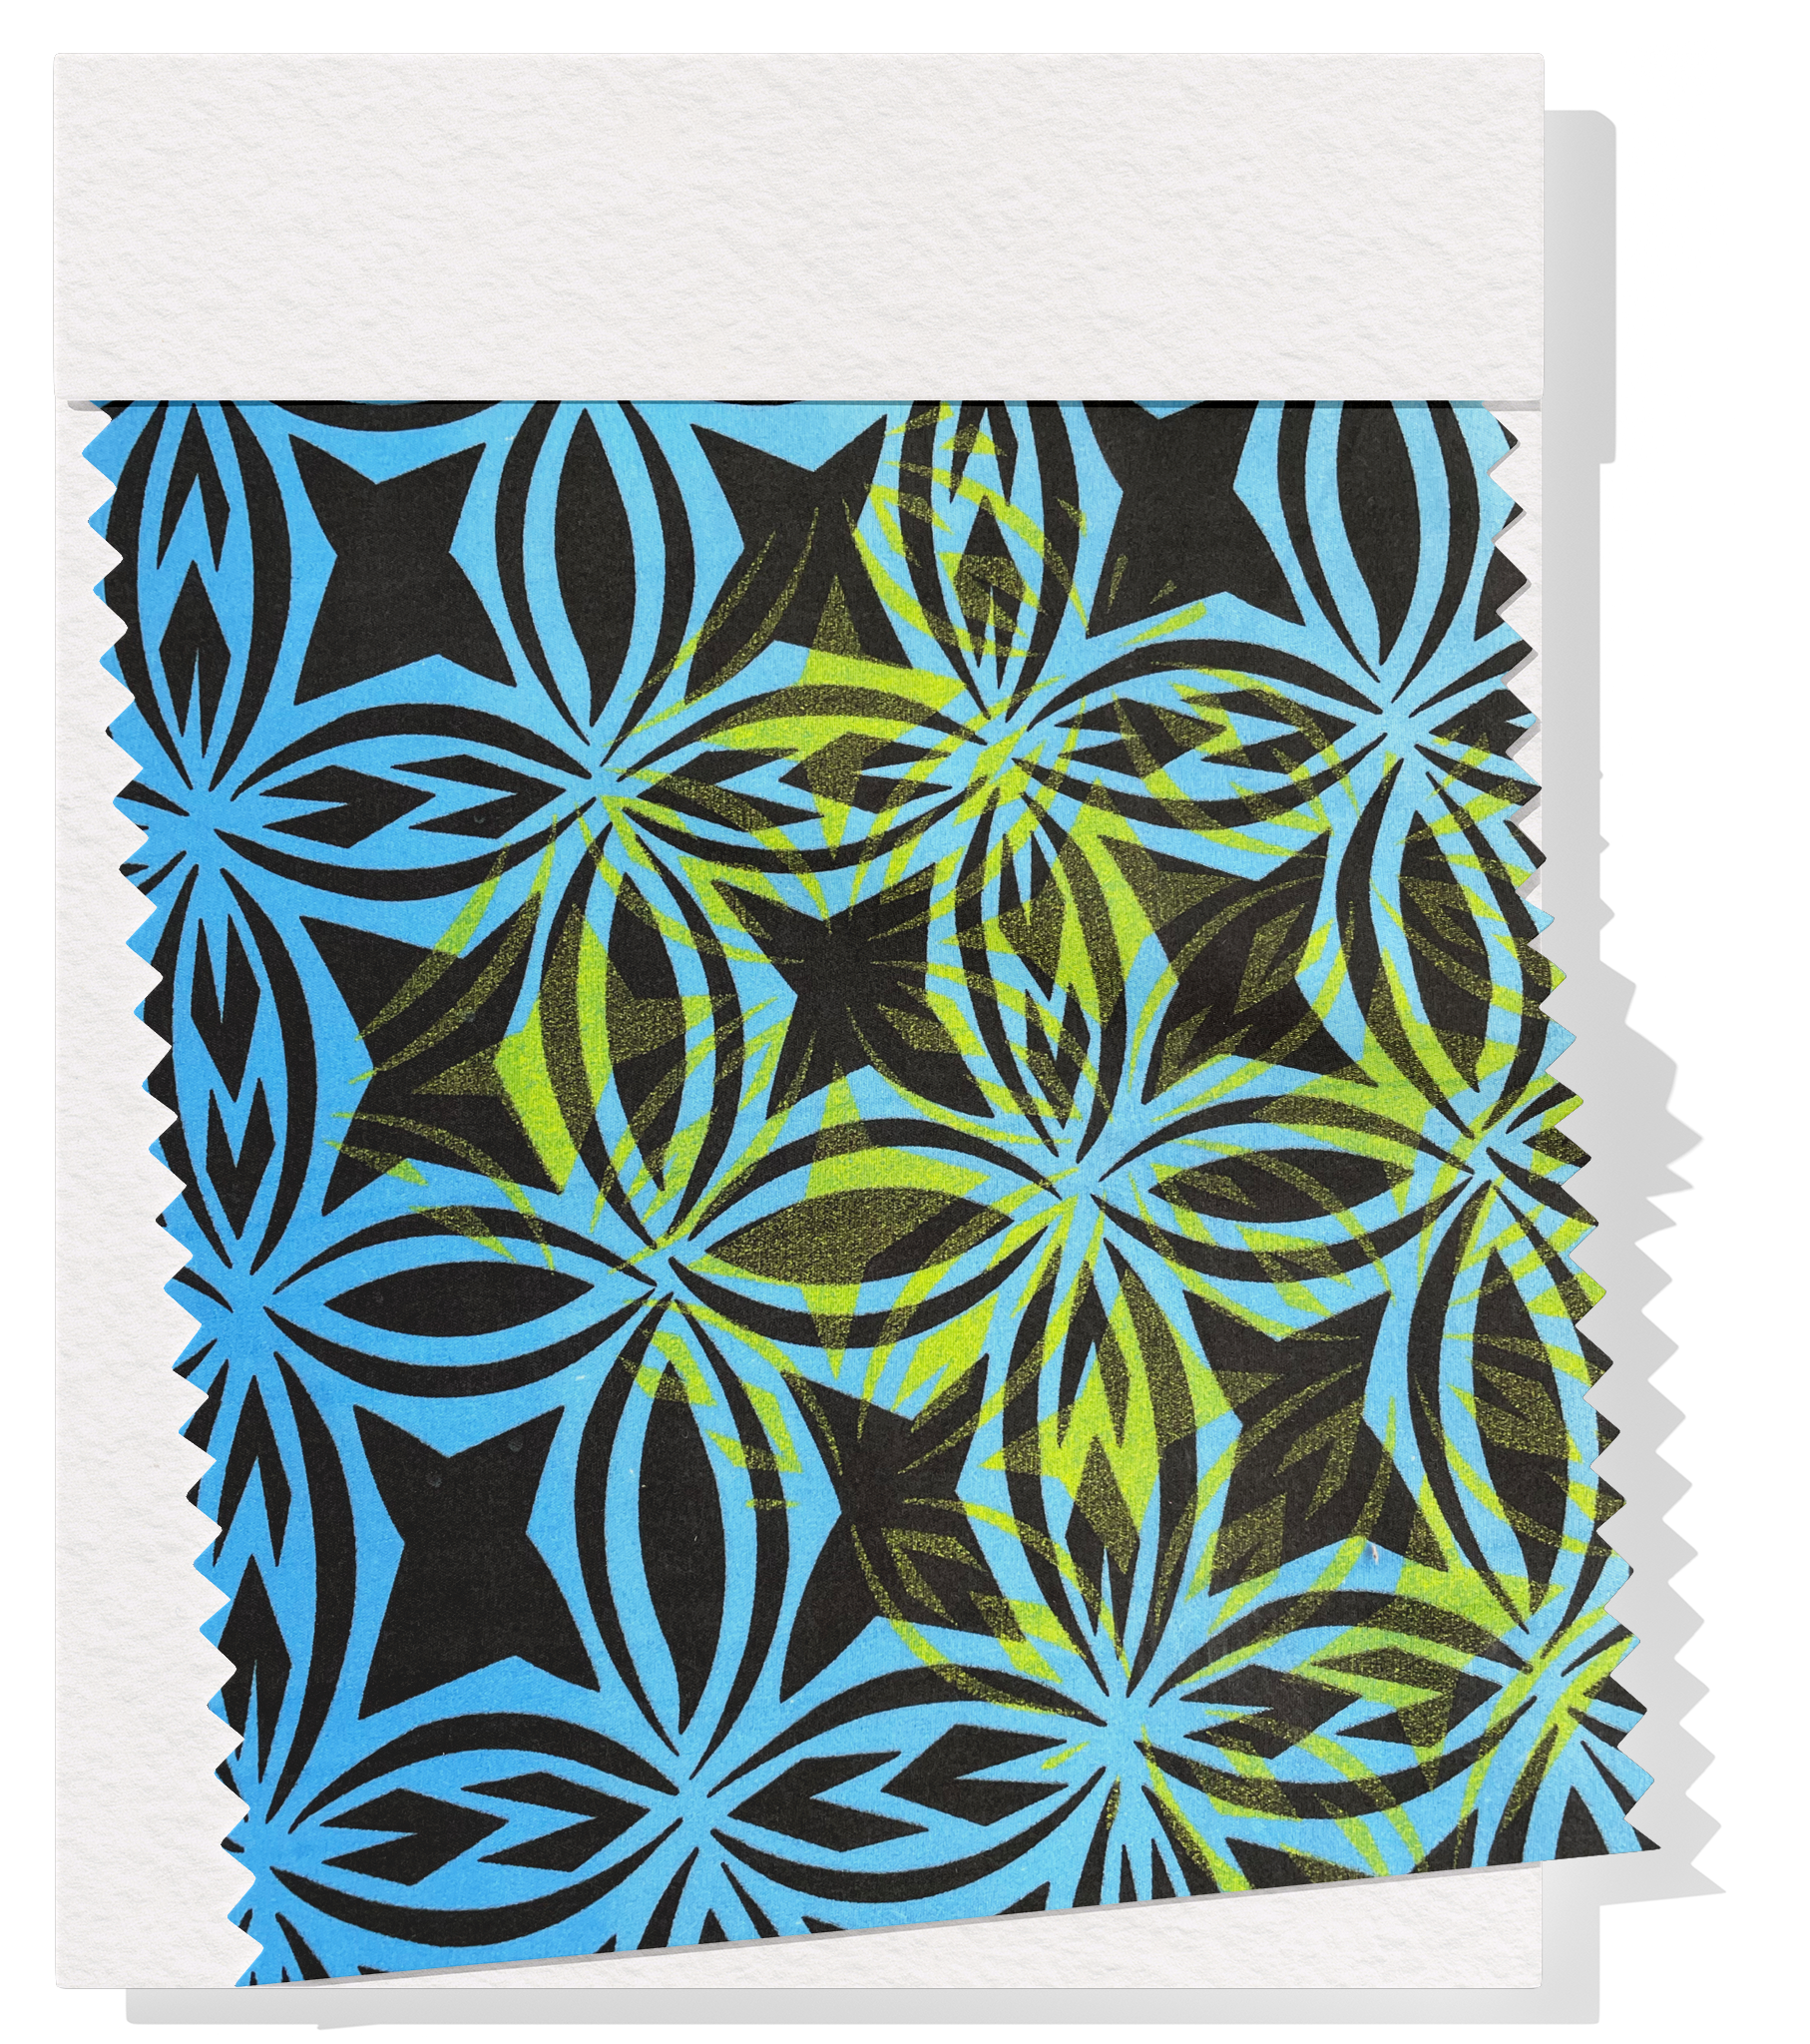 Polyester / Cotton Pacific Print $3.00p/m - Blue and Lime